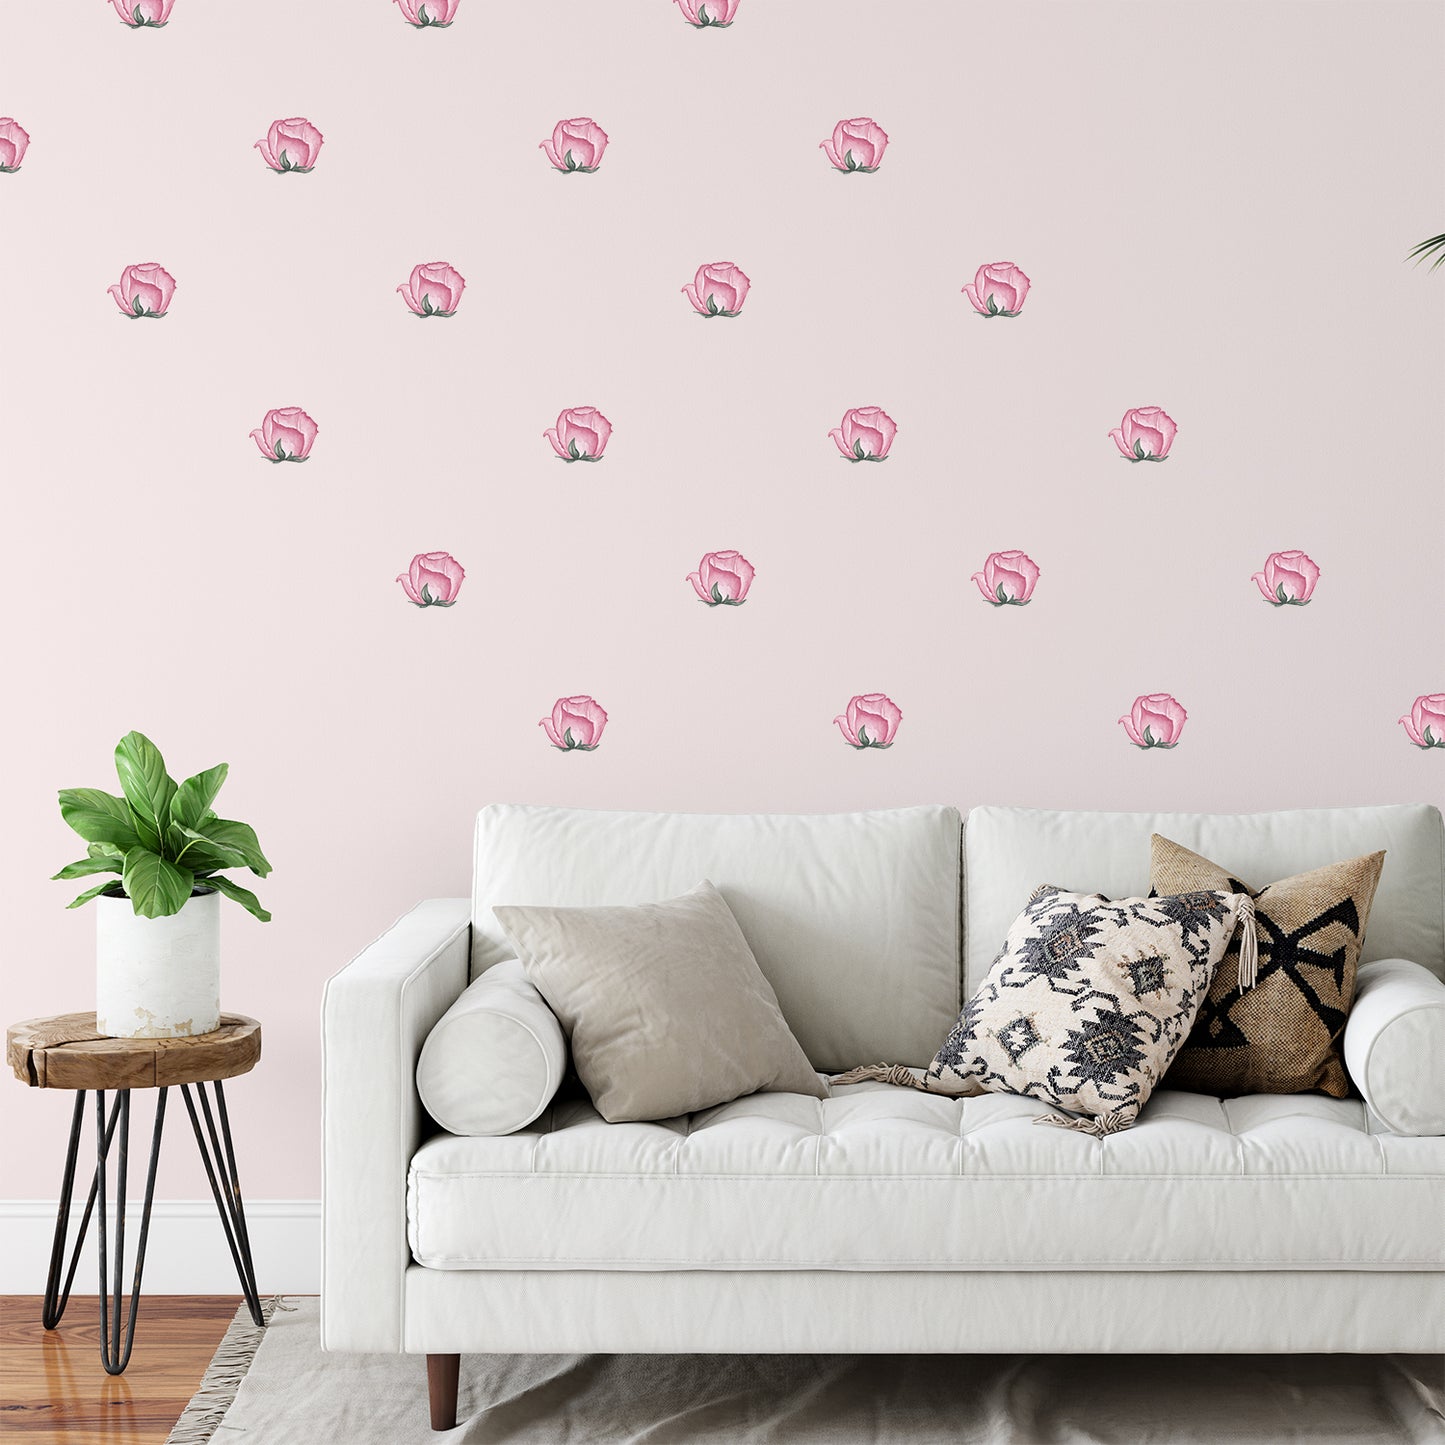 Watercolour roses | Fabric wall stickers